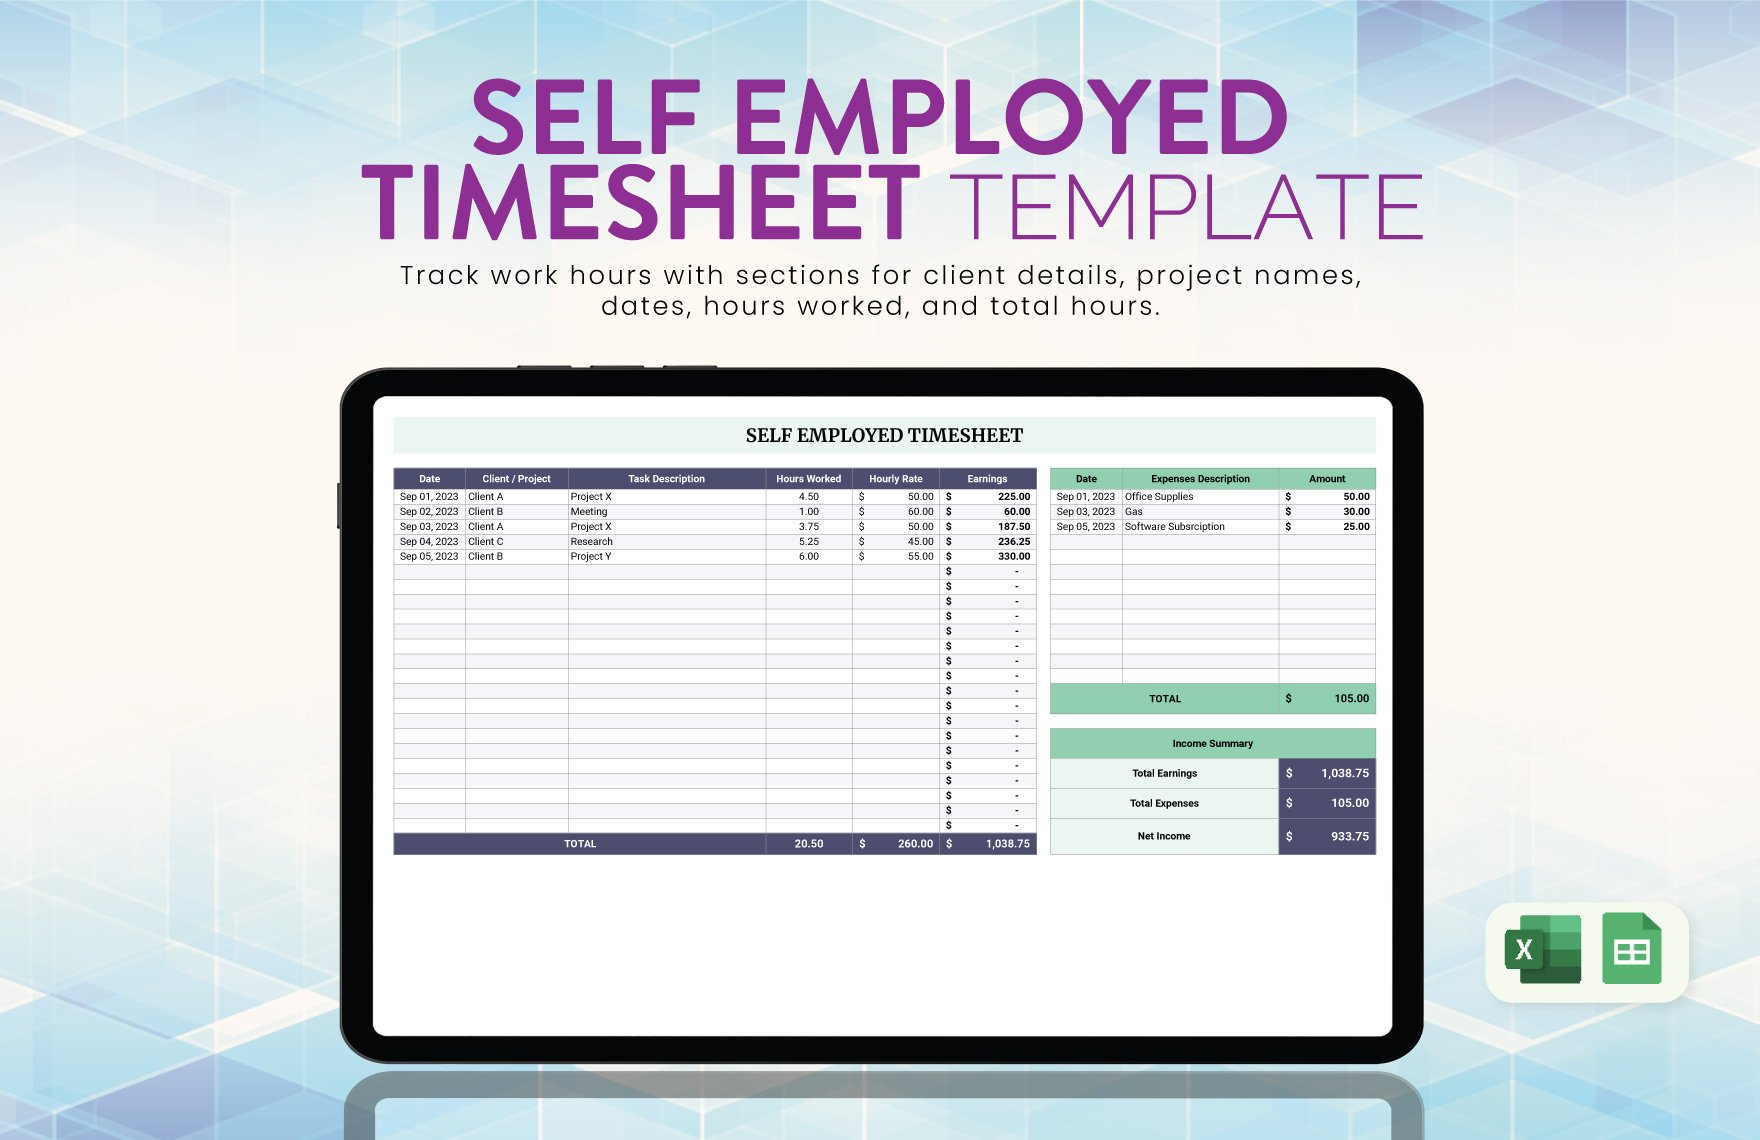 Self Employed Timesheet Template in Excel, Google Sheets